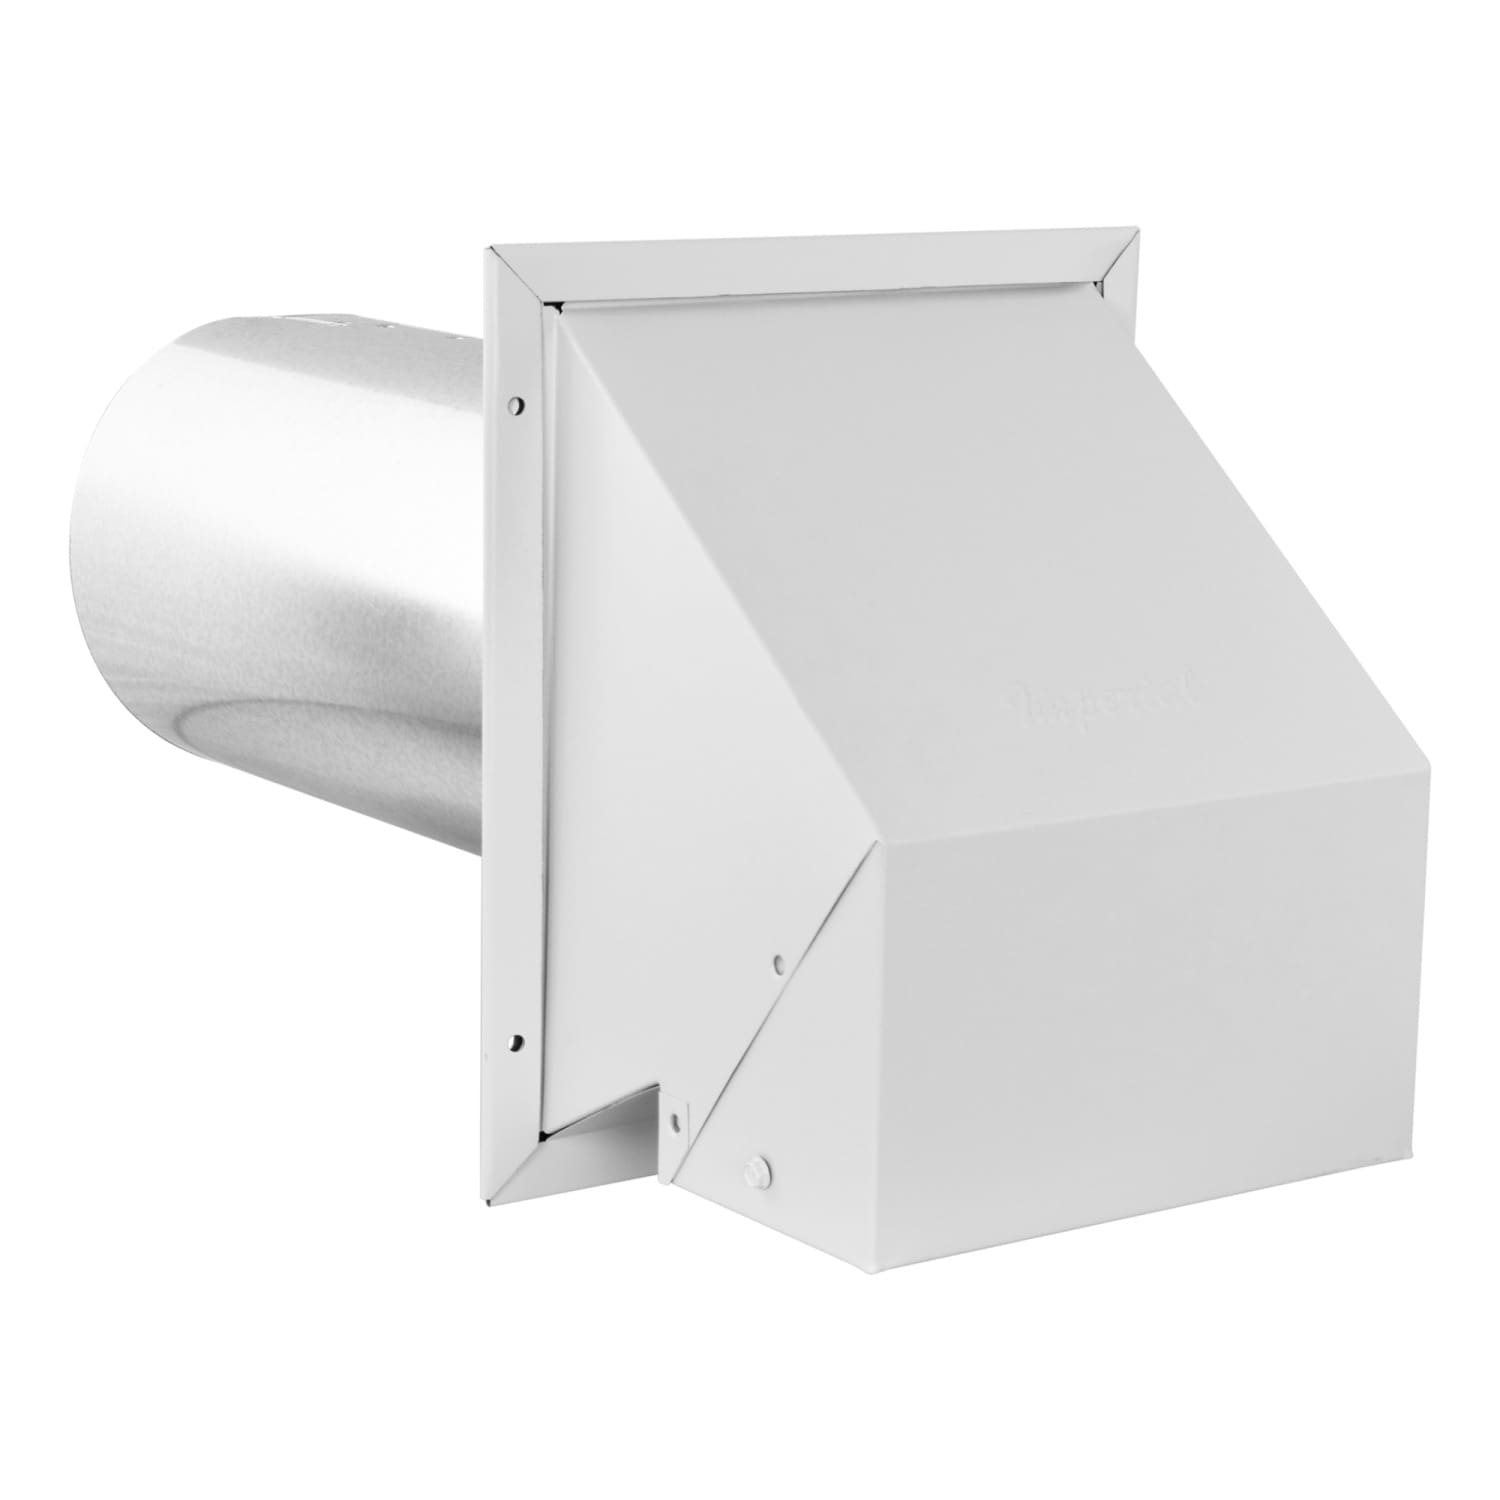 IMPERIAL 6-in dia Galvanized Steel R2 Exhaust/Intake Dryer Vent Hood in the  Dryer Vent Hoods department at Lowes.com